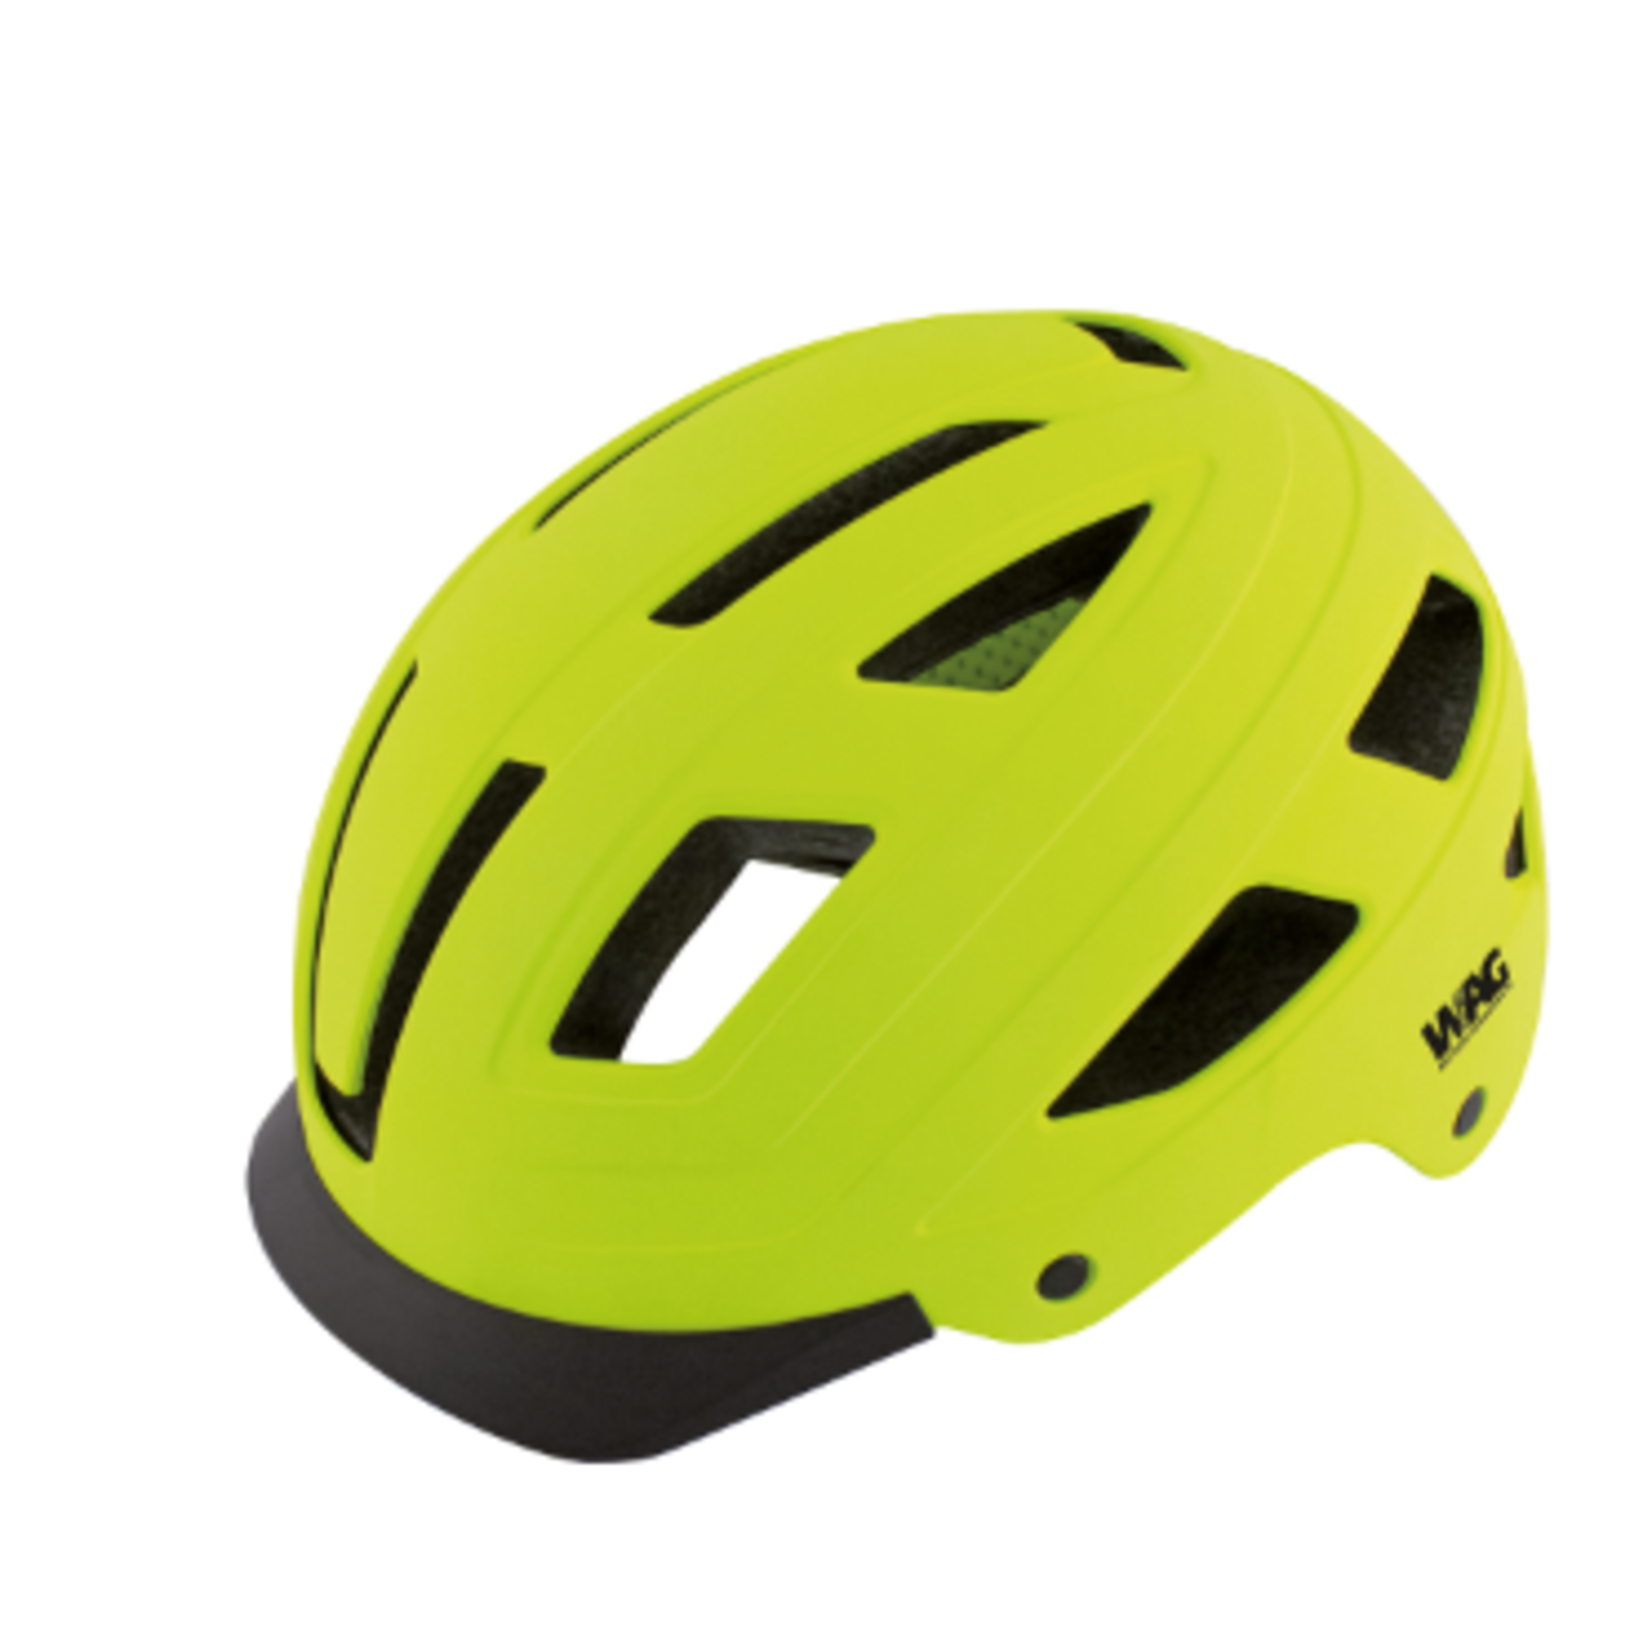 WAG WAG CITY HELMET WITH LIGHT FLUO YELLOW